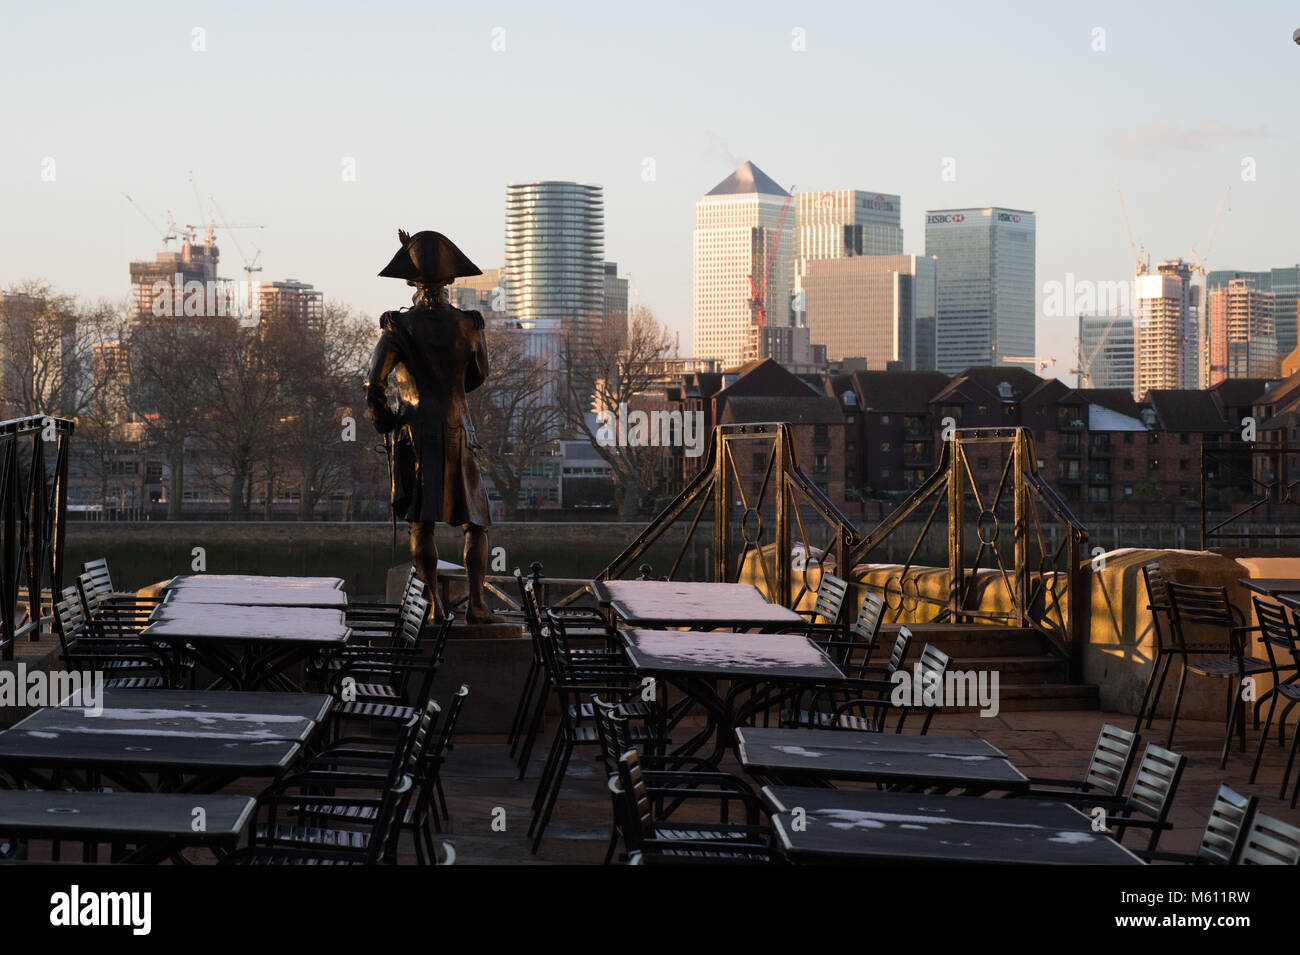 Greenwich, United Kingdom, 27th February, 2018. Snow blankets Greenwich after blizzards sees the 'beast from the east' arrive in London. Jon Blankfield/Alamy Live News Stock Photo